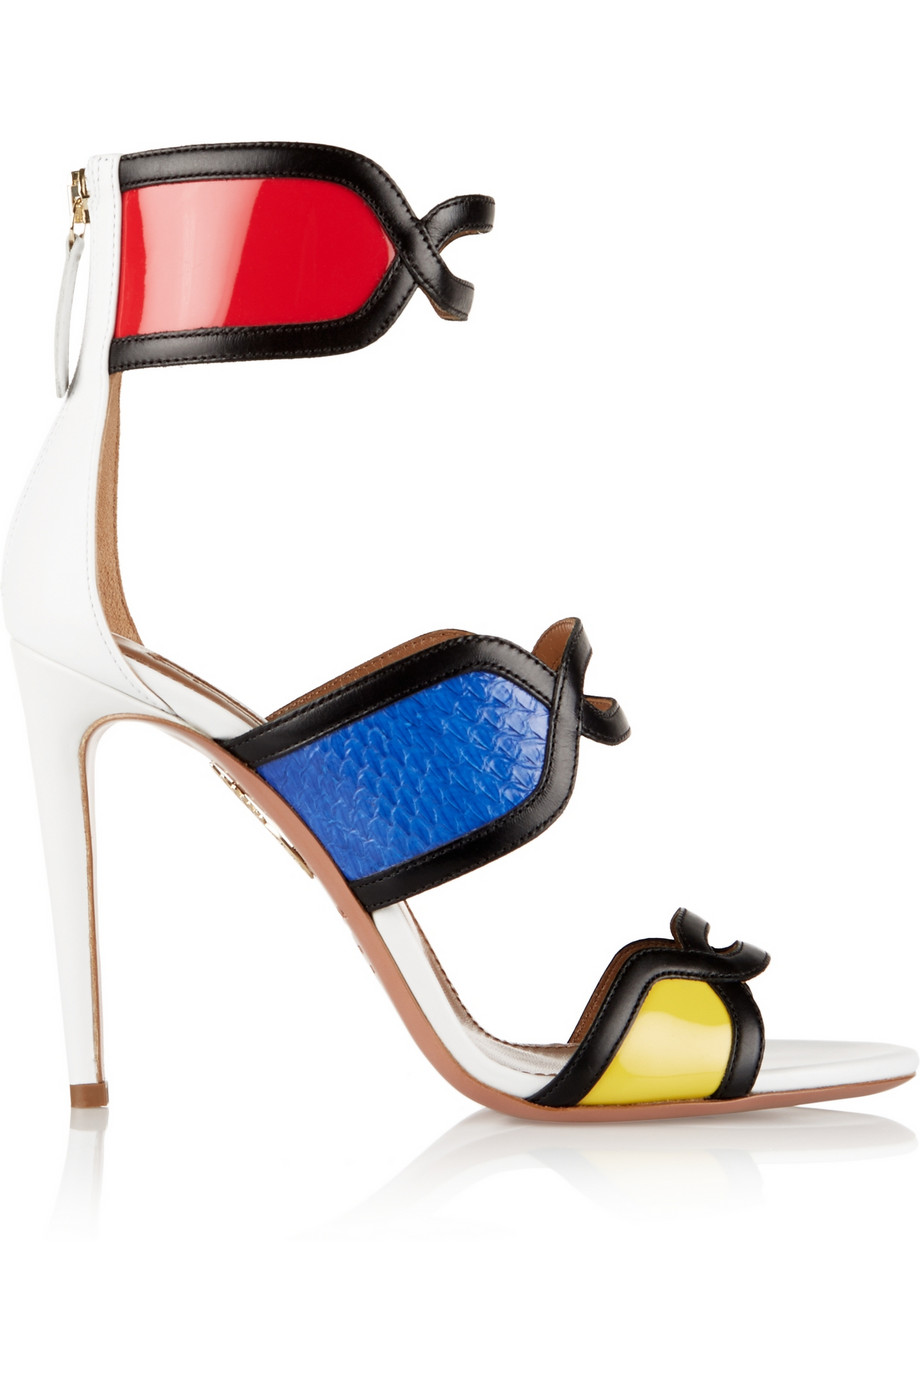 Aquazzura It's Gorgeous Leather and Elaphe Yellow, Blue, and Red Colorblcok Sandals